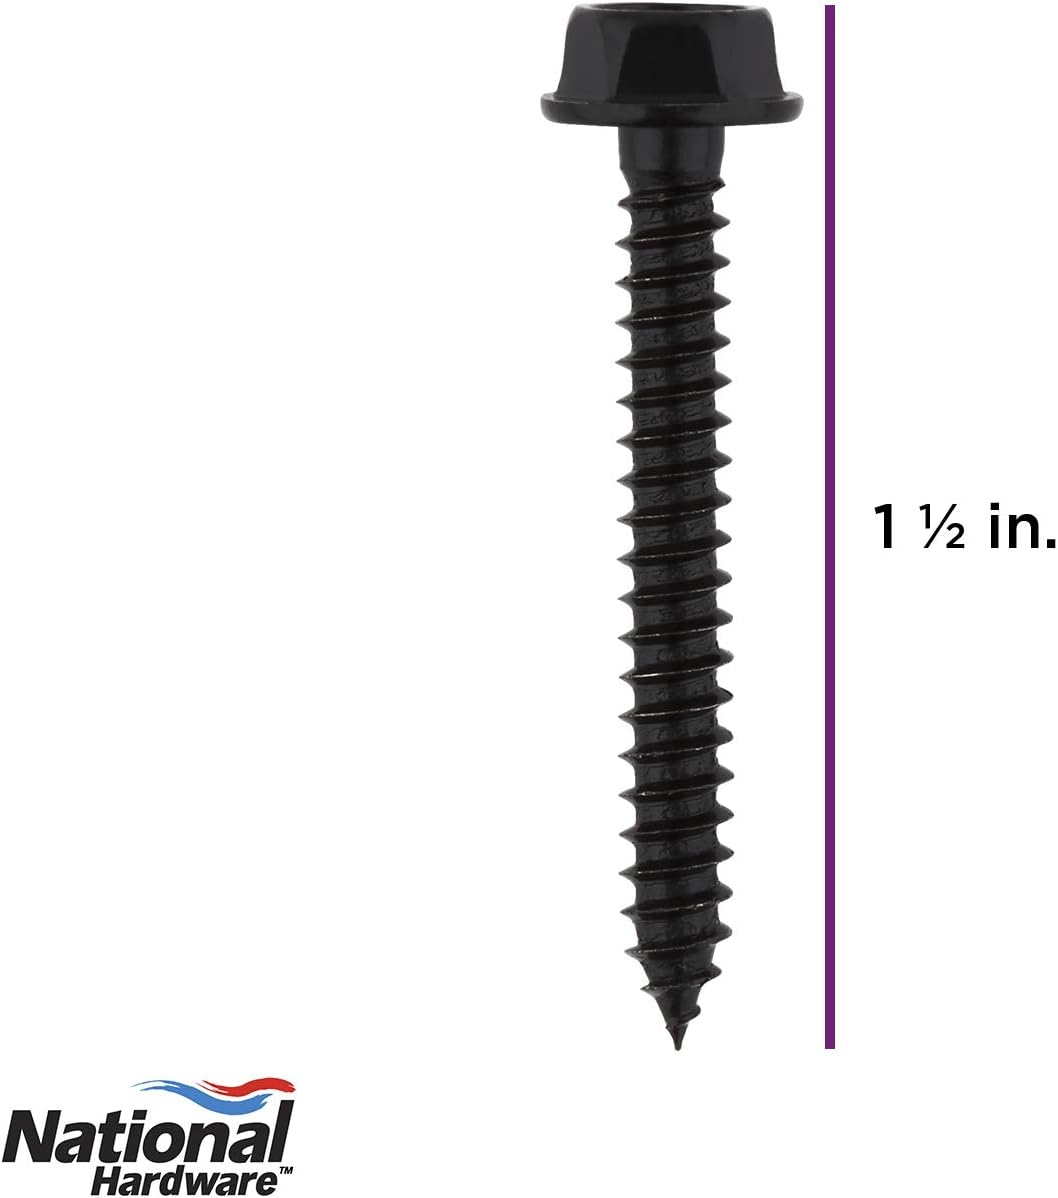 National Hardware N800-122 Hex Head Screw Used to Install 's Outdoor Reinforcement Hardware Collections on Pergolas, Gazebos, Garden, Arches, Rai